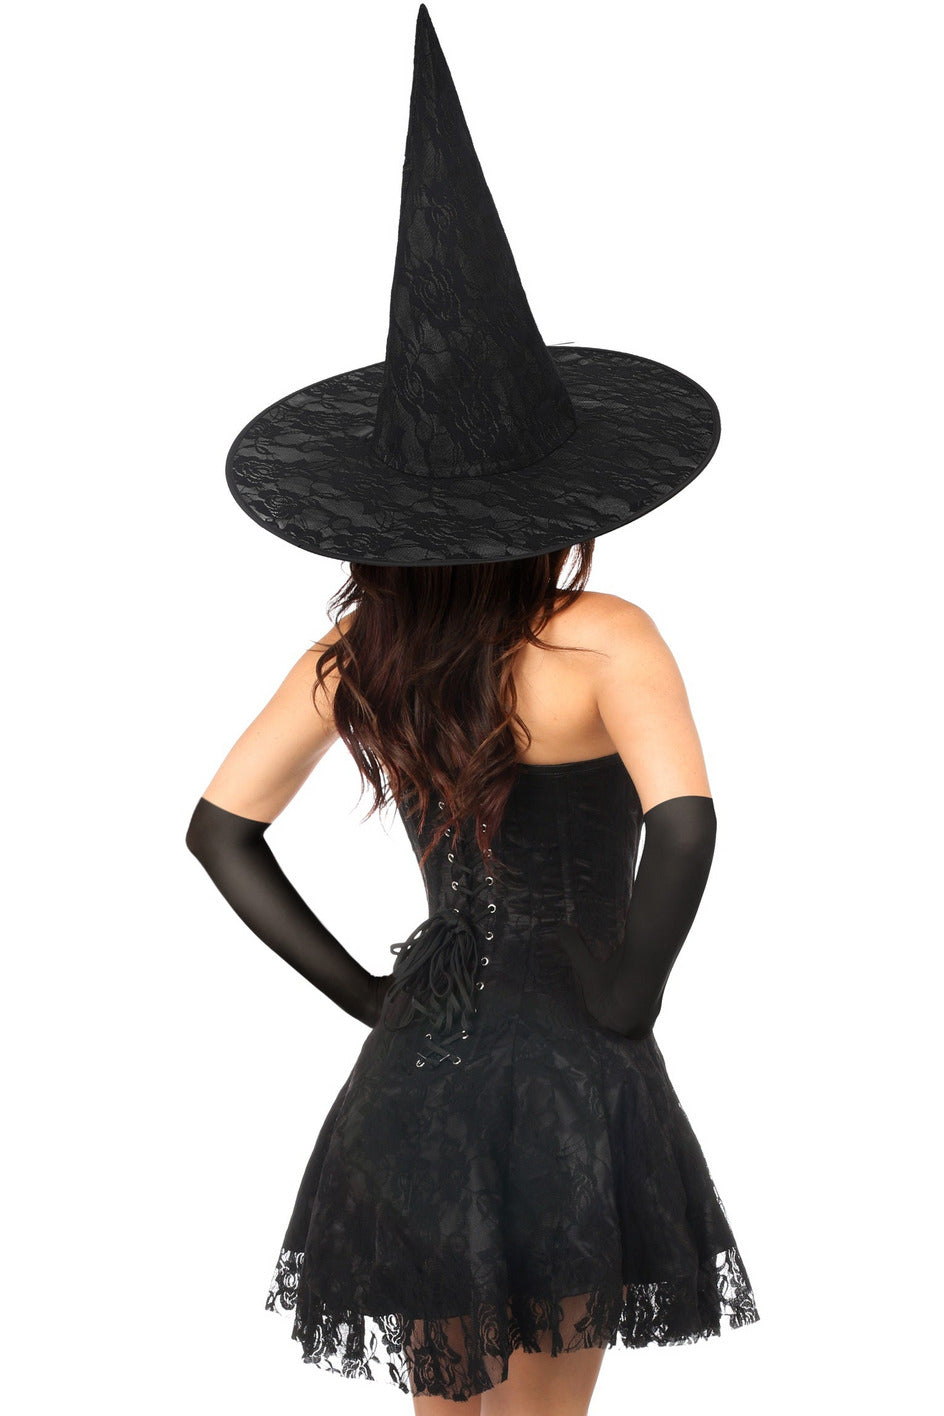 Daisy Corsets Lavish 3 PC Sultry Witch Corset Dress Costume